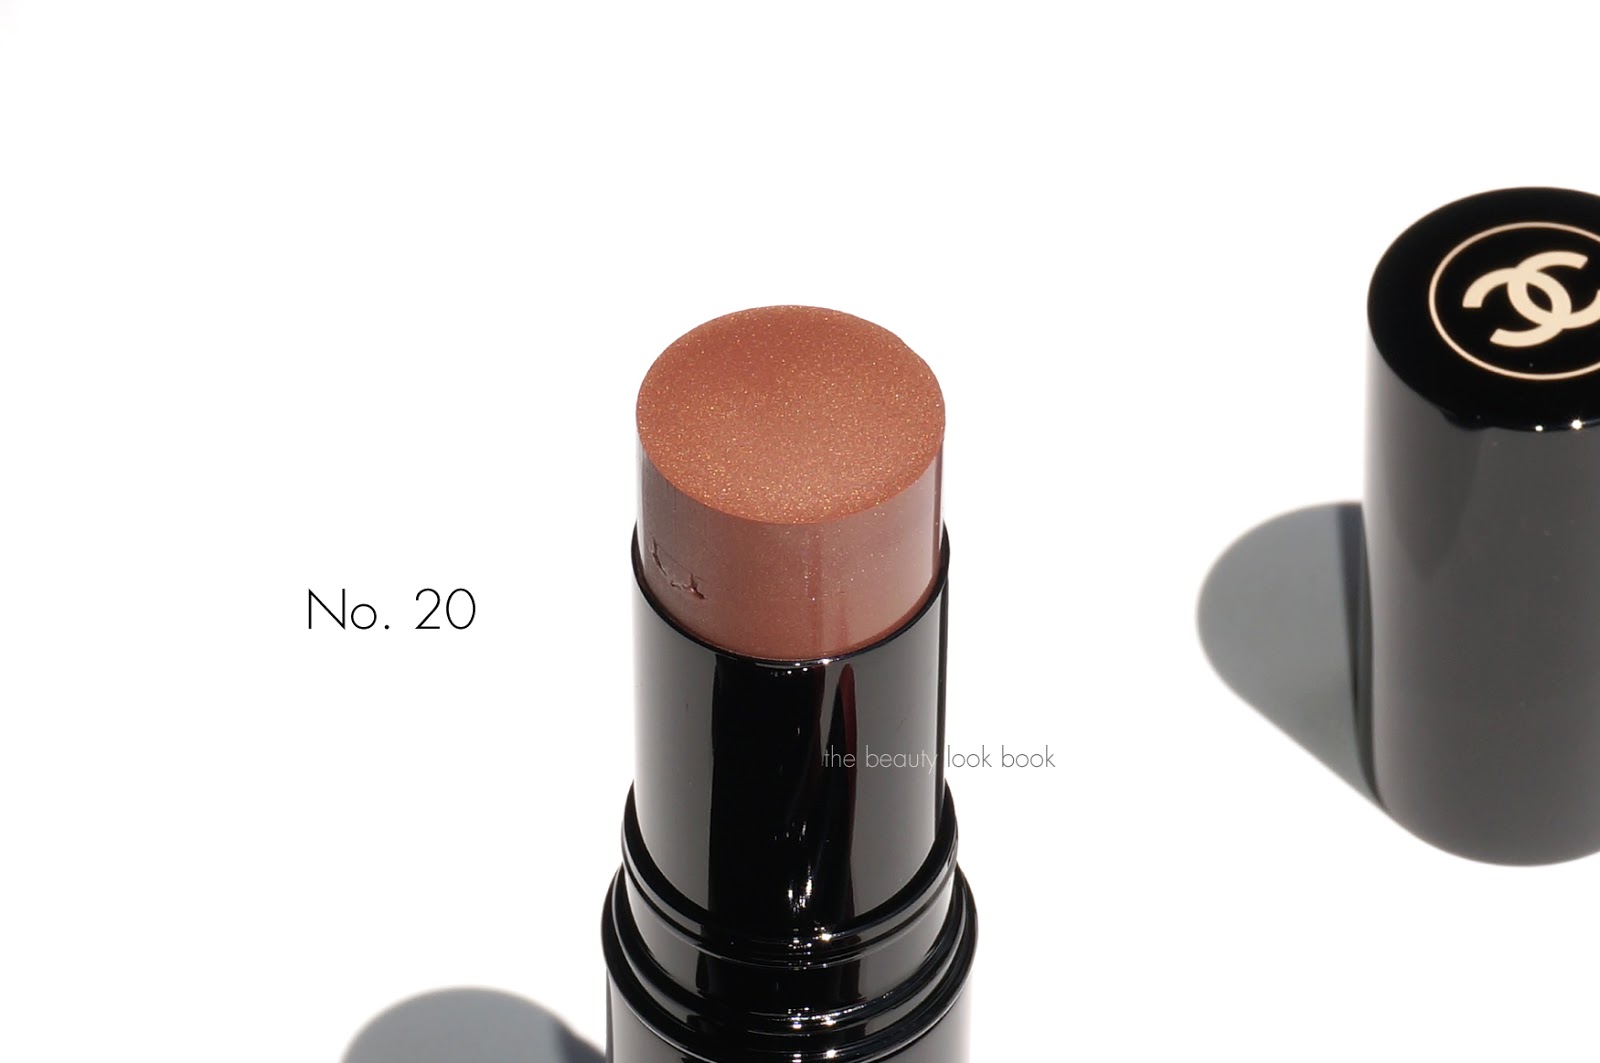 Chanel Les Beiges Healthy Glow Sheer Colour Stick The Beauty Look Book